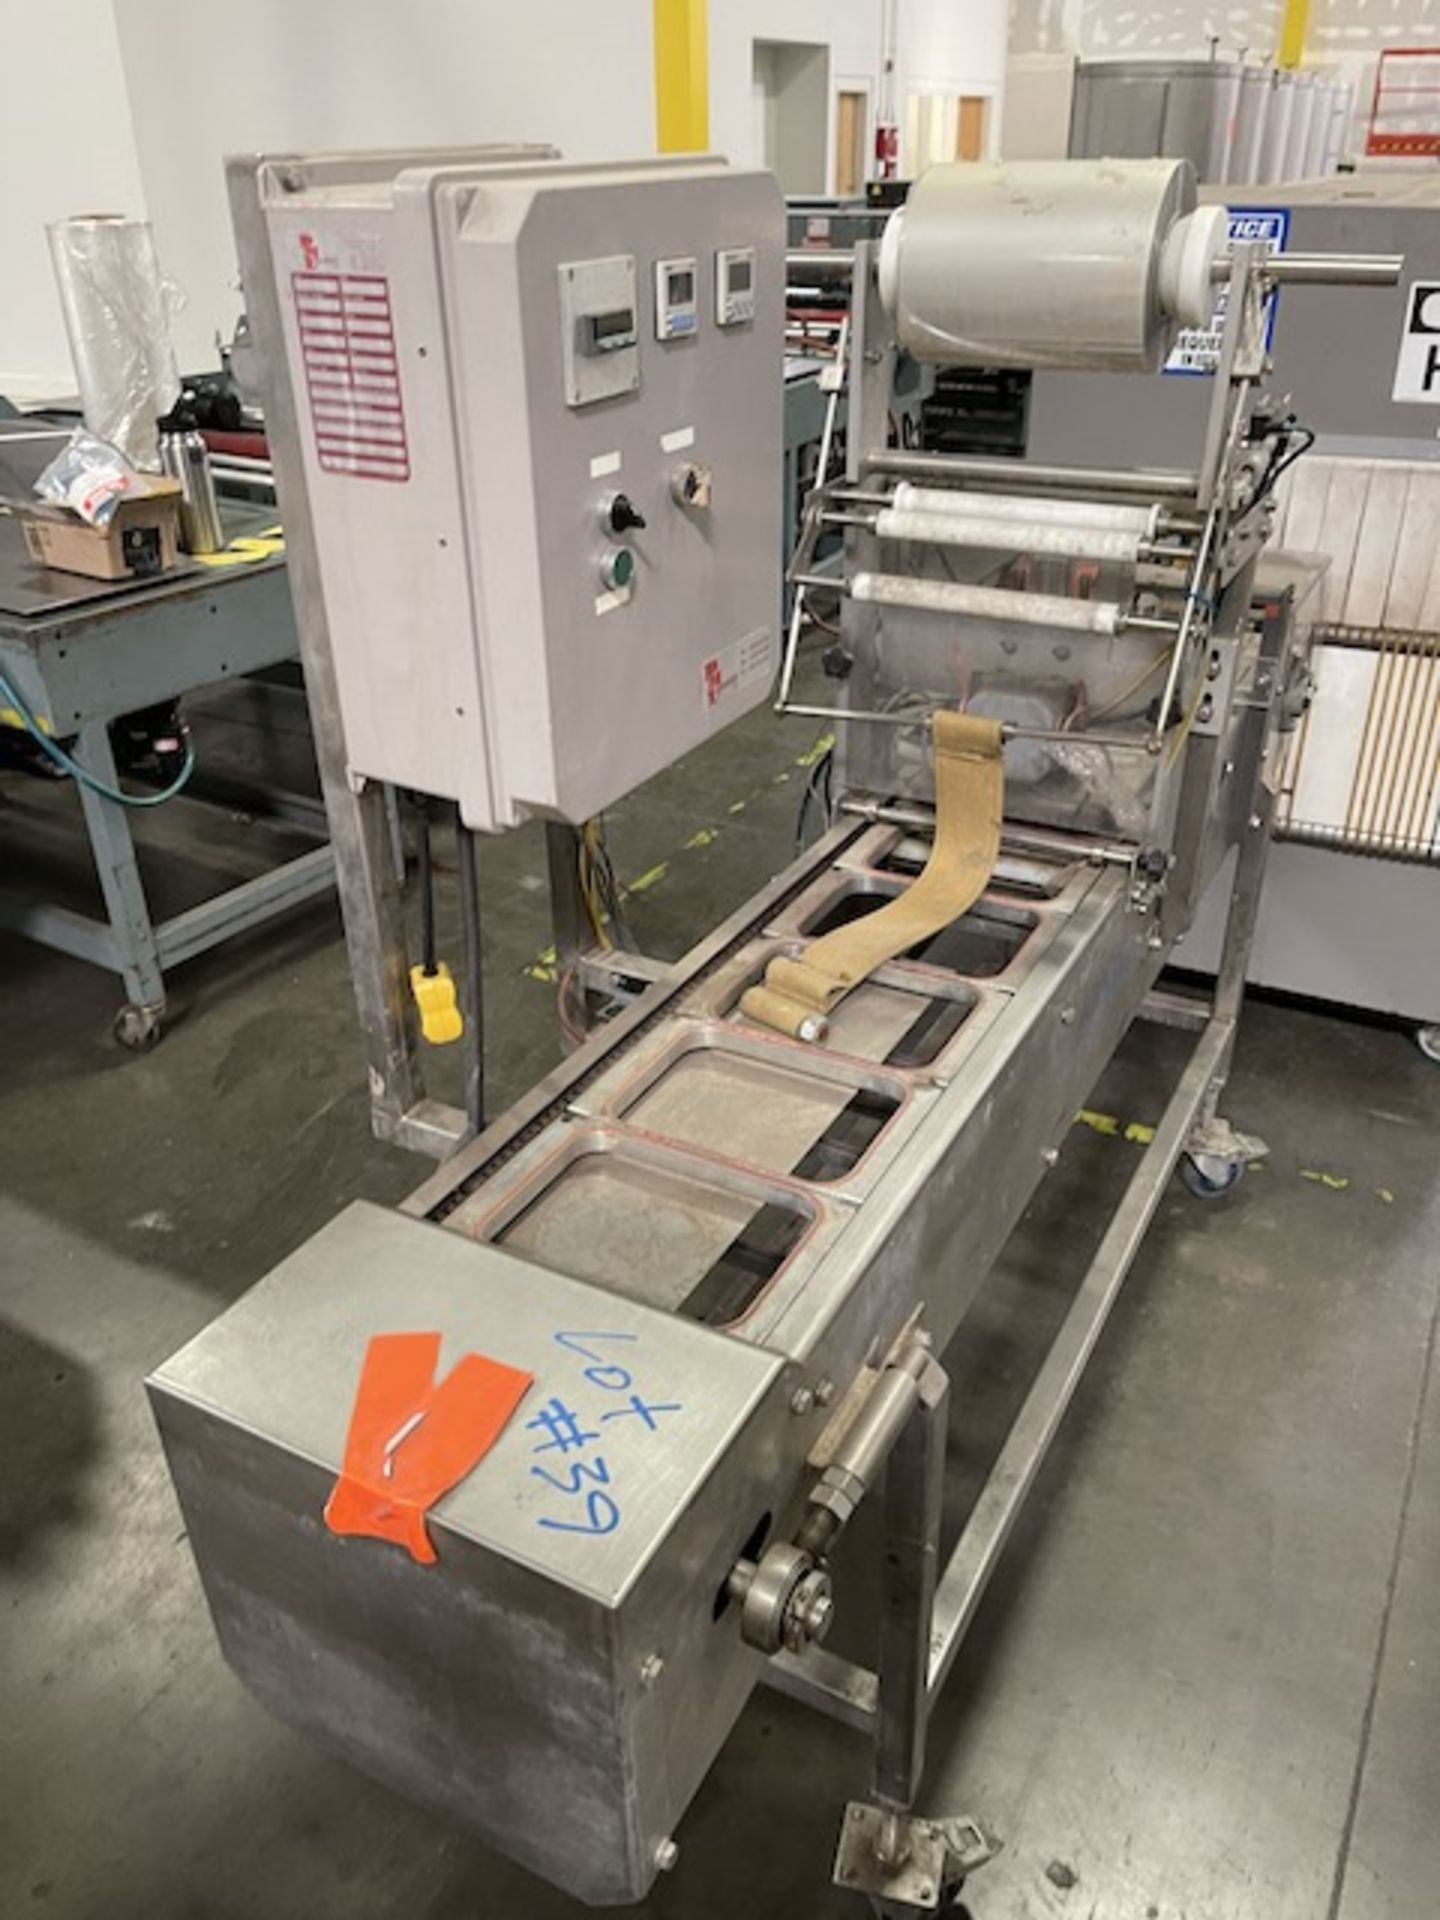 DM Lapointe Tray Sealer, 6.5" x 8.5" Dies, Portable Unit Rigging/Loading Fee $50 - Image 2 of 5